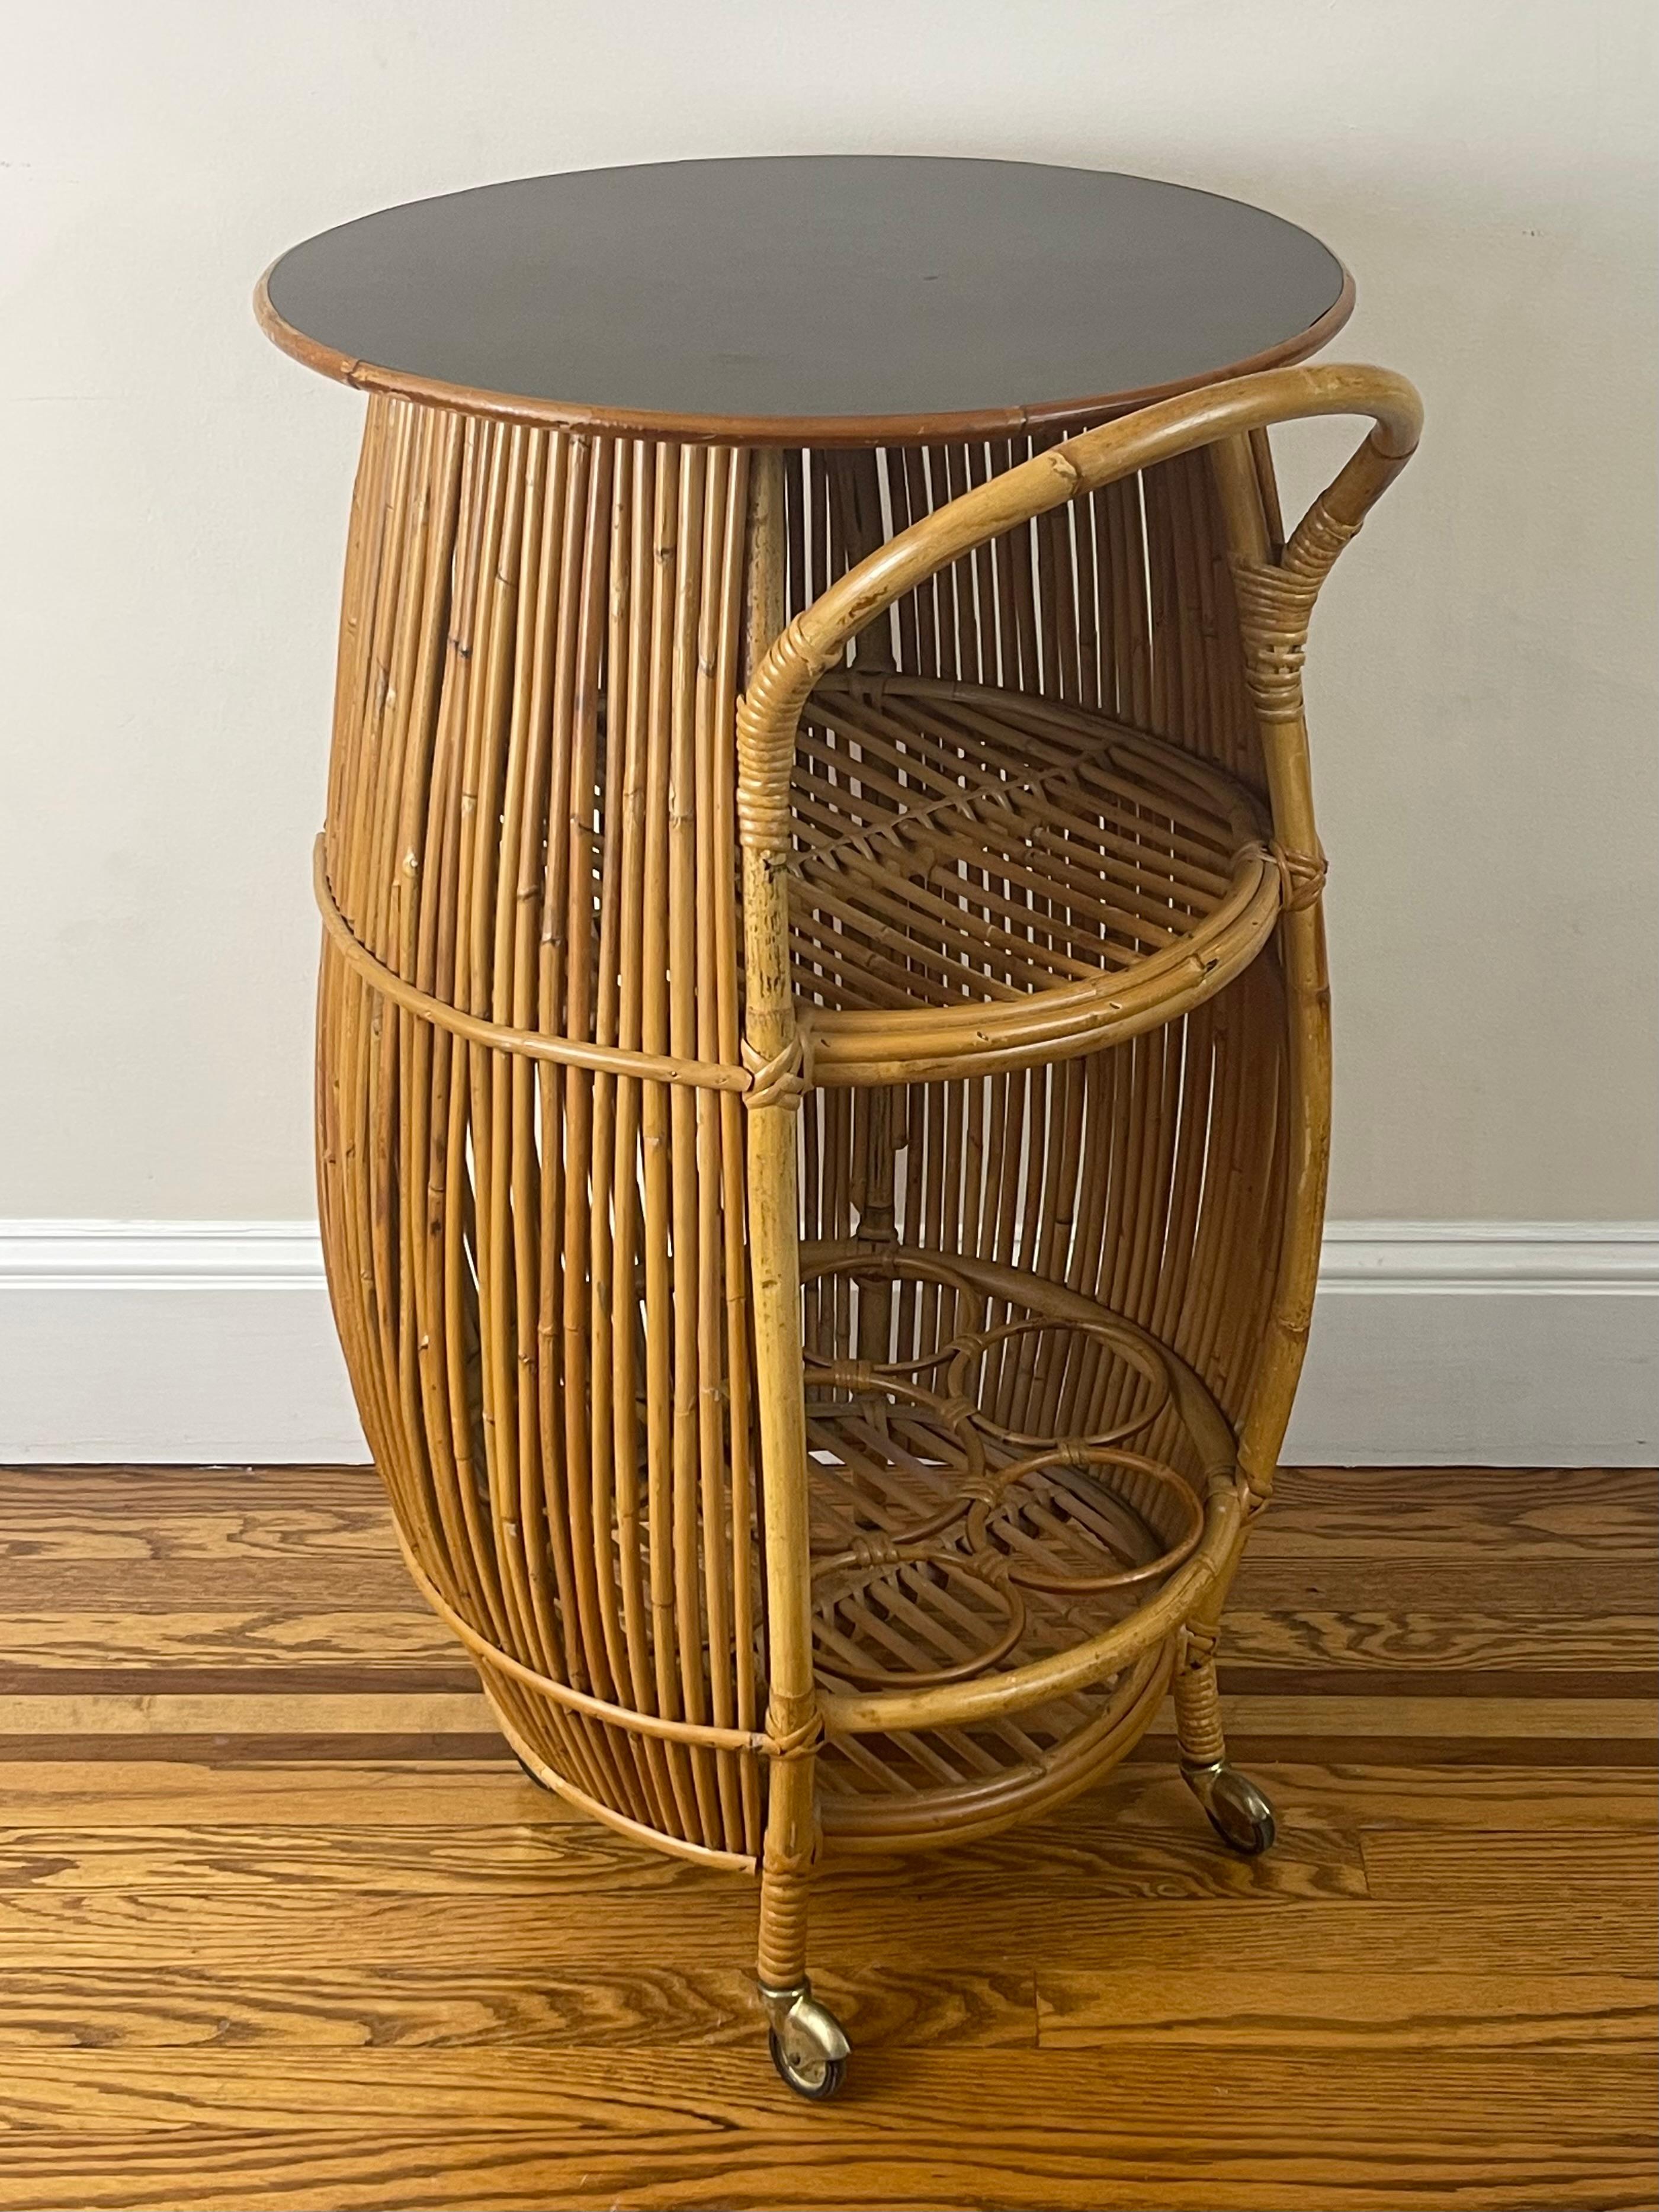 Splendid barrel-shaped bar cart in bamboo and rattan manufactured by Bonacina, Italy, c. 1960s. With its interior shelf, bottle rack, and black laminate top, this mid-century piece is as every bit as functional as it is decorative. Original brass